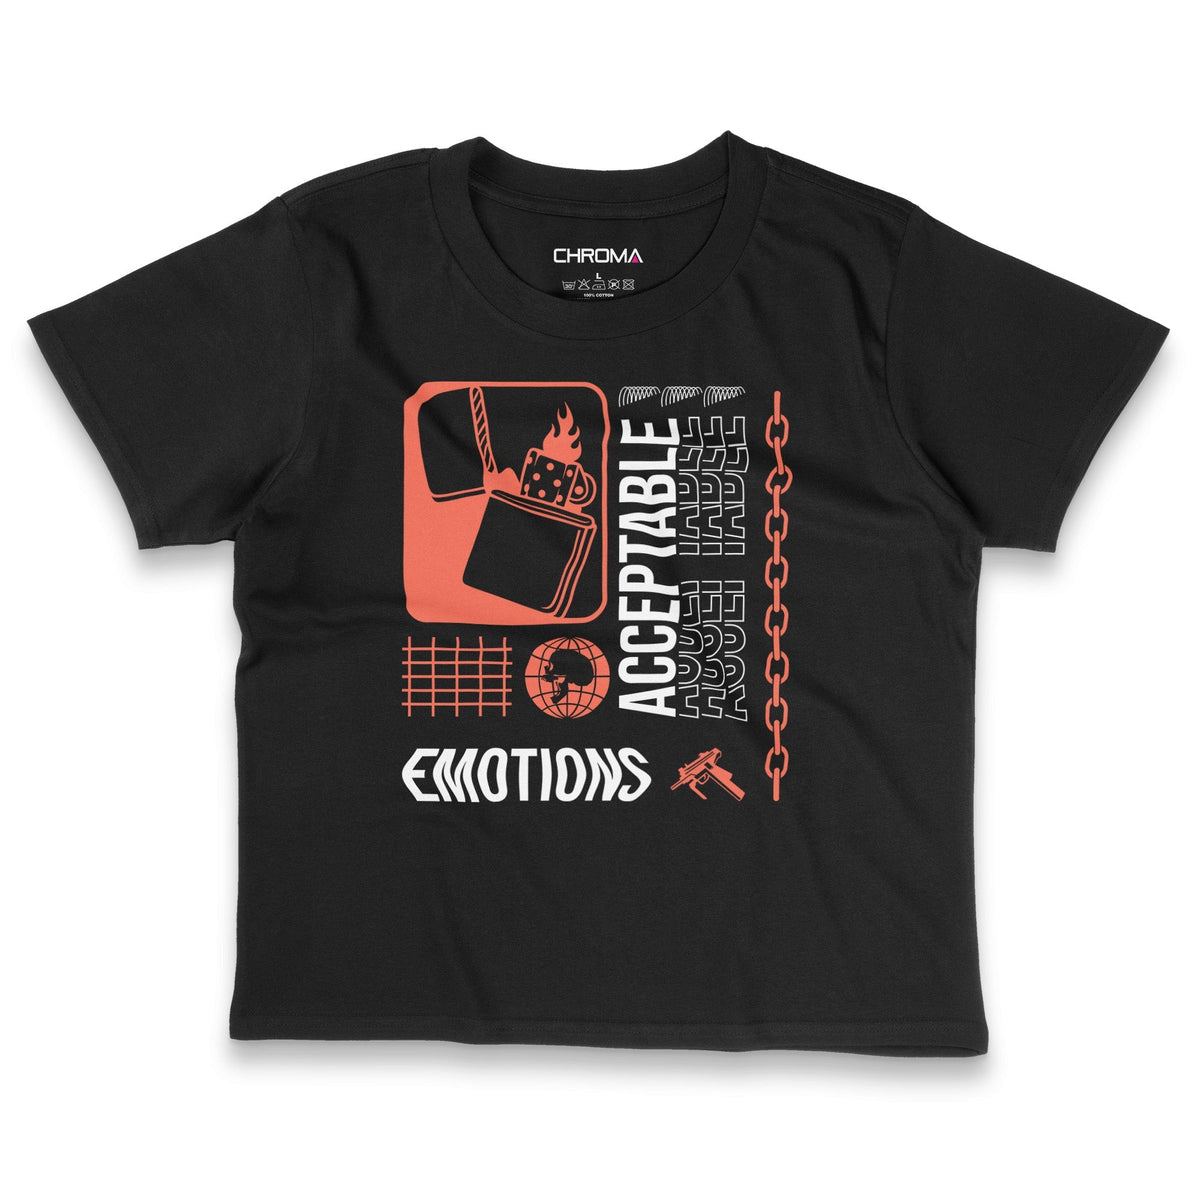 Acceptable Emotions | Women's Cropped T-Shirt Chroma Clothing